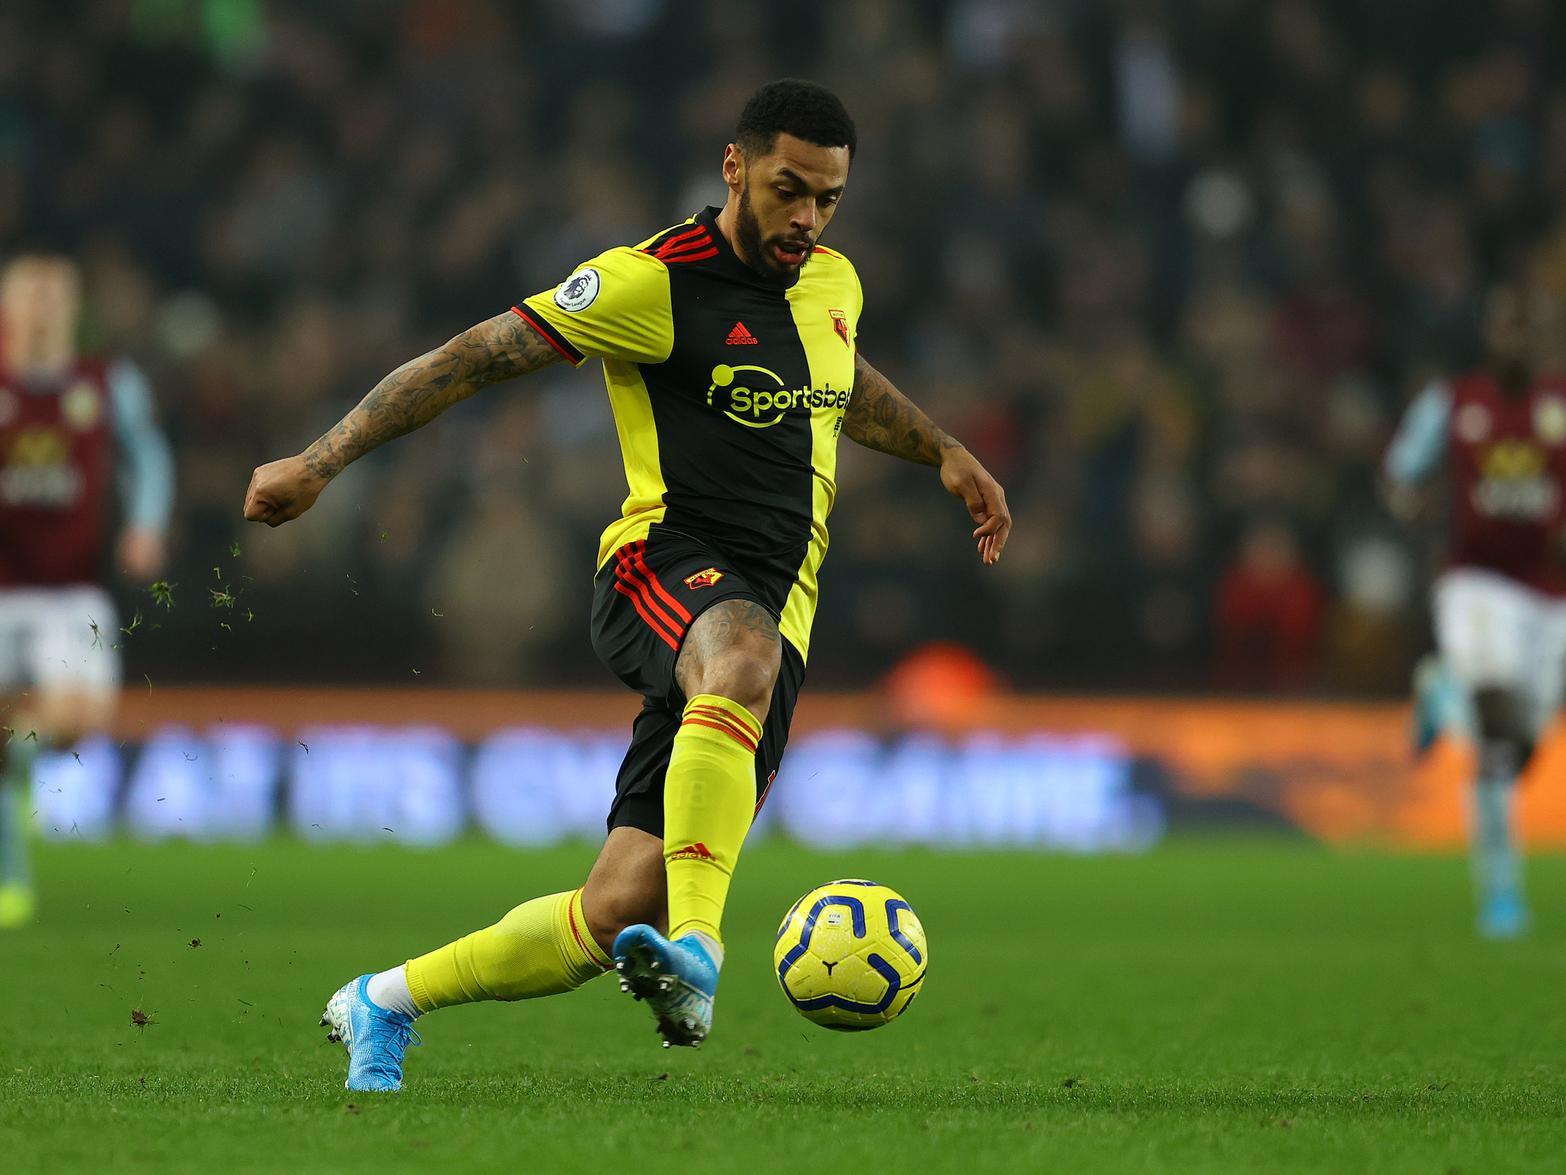 Leeds United are said to be moving closer to finalising a move for Watford striker Andre Gray, after the Hornets reportedly "softened" their stance on letting him leave this month. (Daily Star)